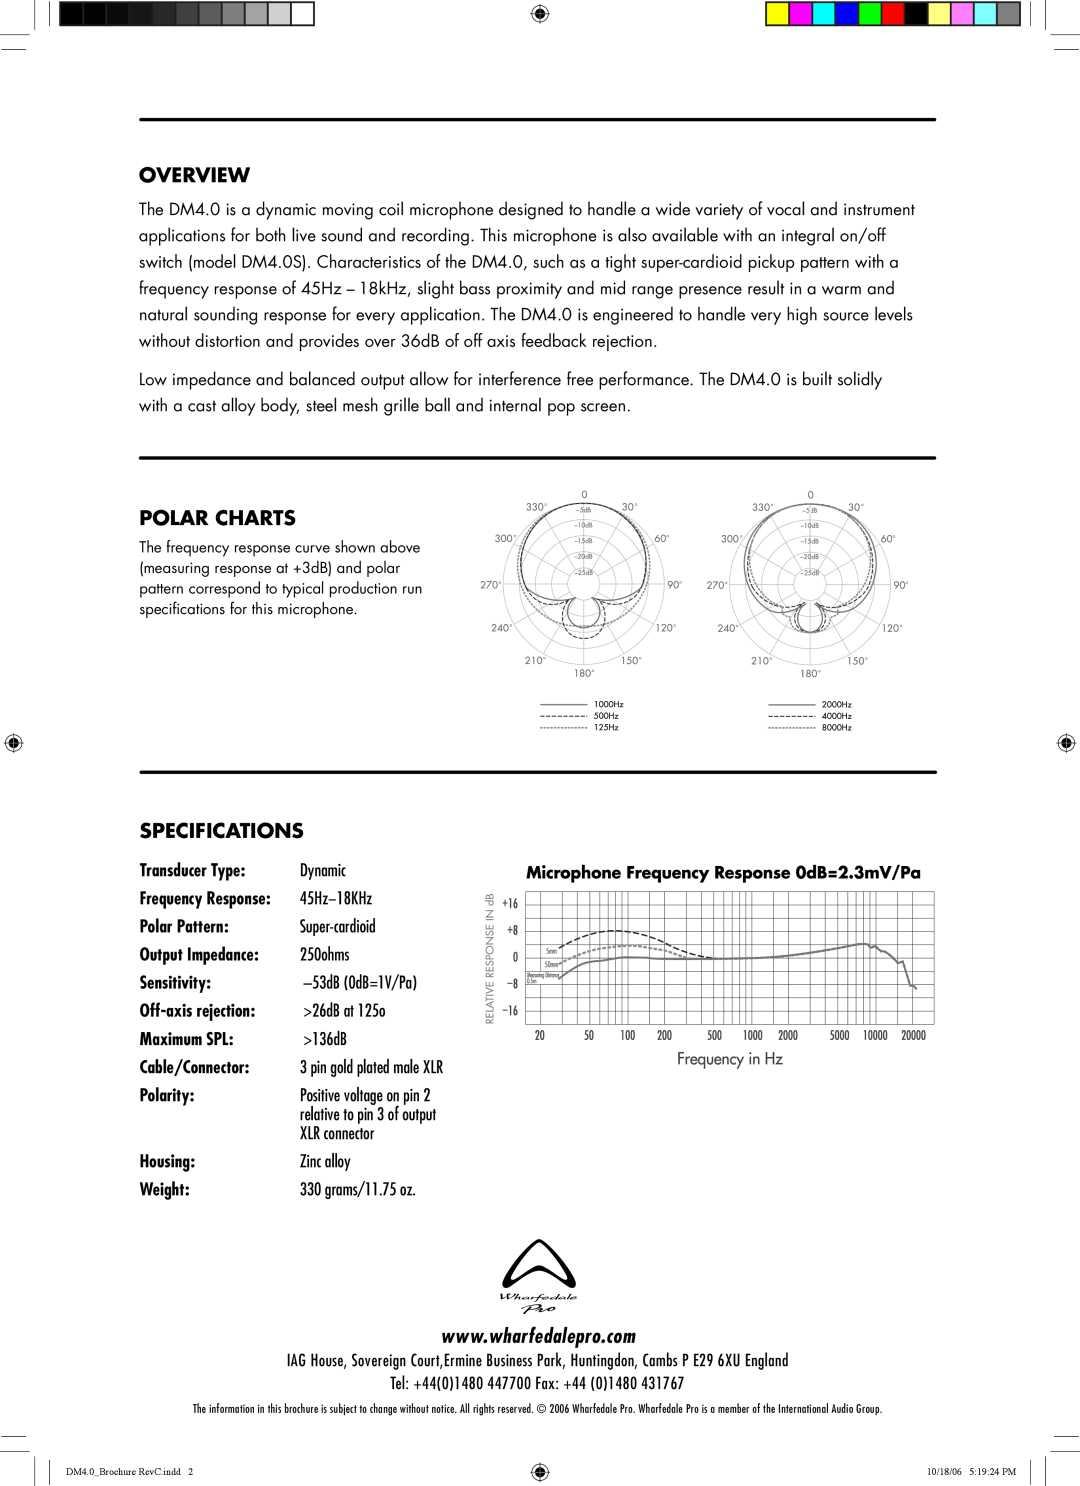 Wharfedale DM4.0S brochure Overview, Polar Charts, Specifications 